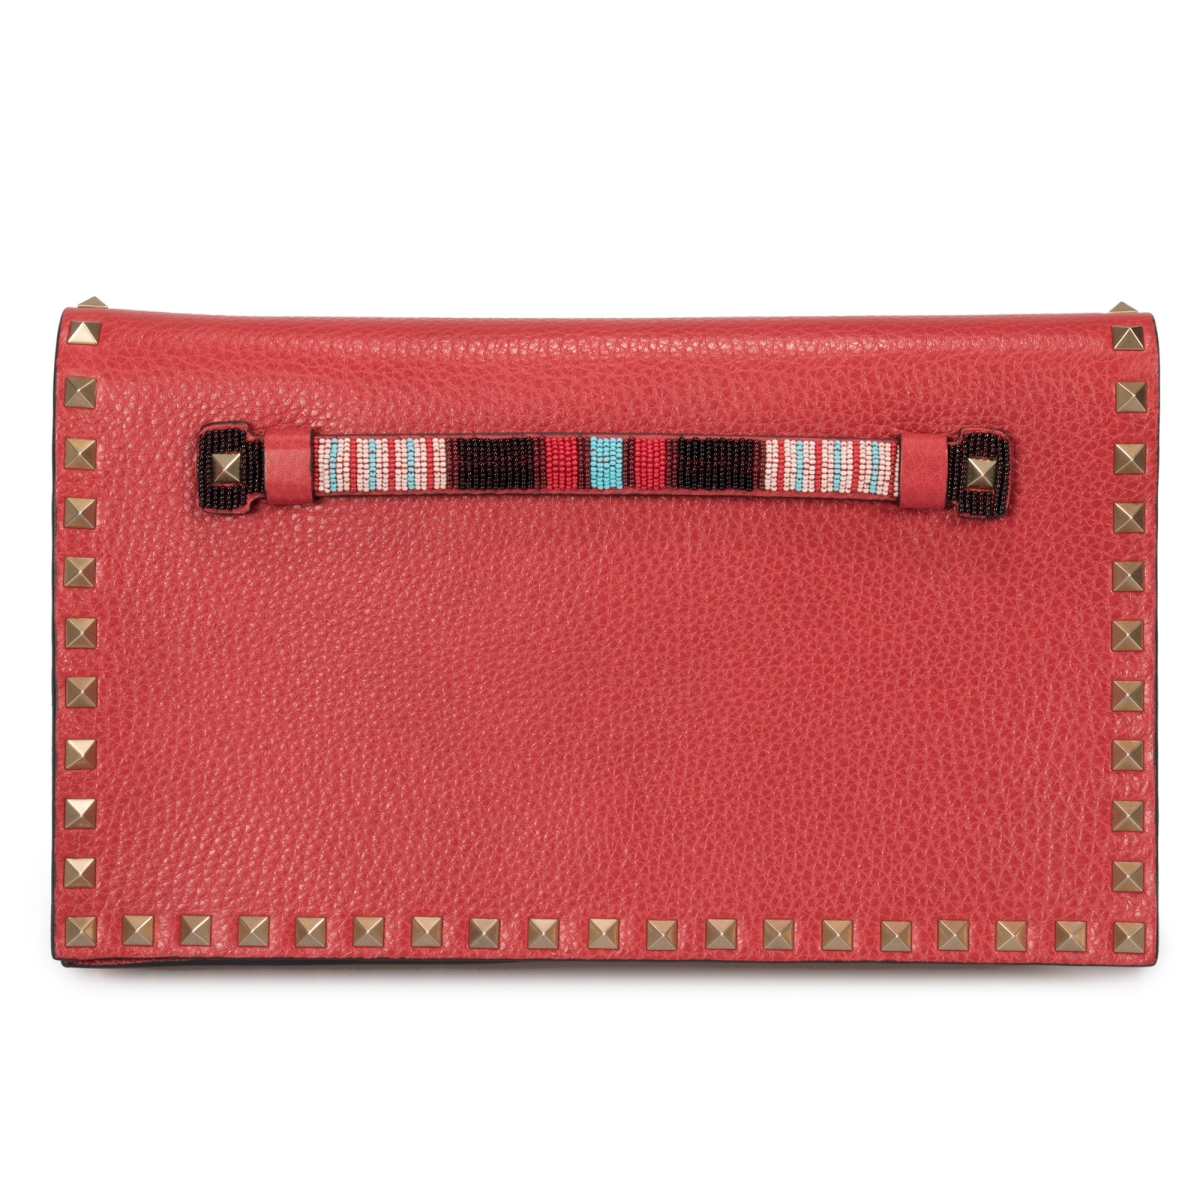 Picture of Valentino VAL-CLCH-KW0B0399SAO-0R0-RED Rockstud Clutch Purse, Red